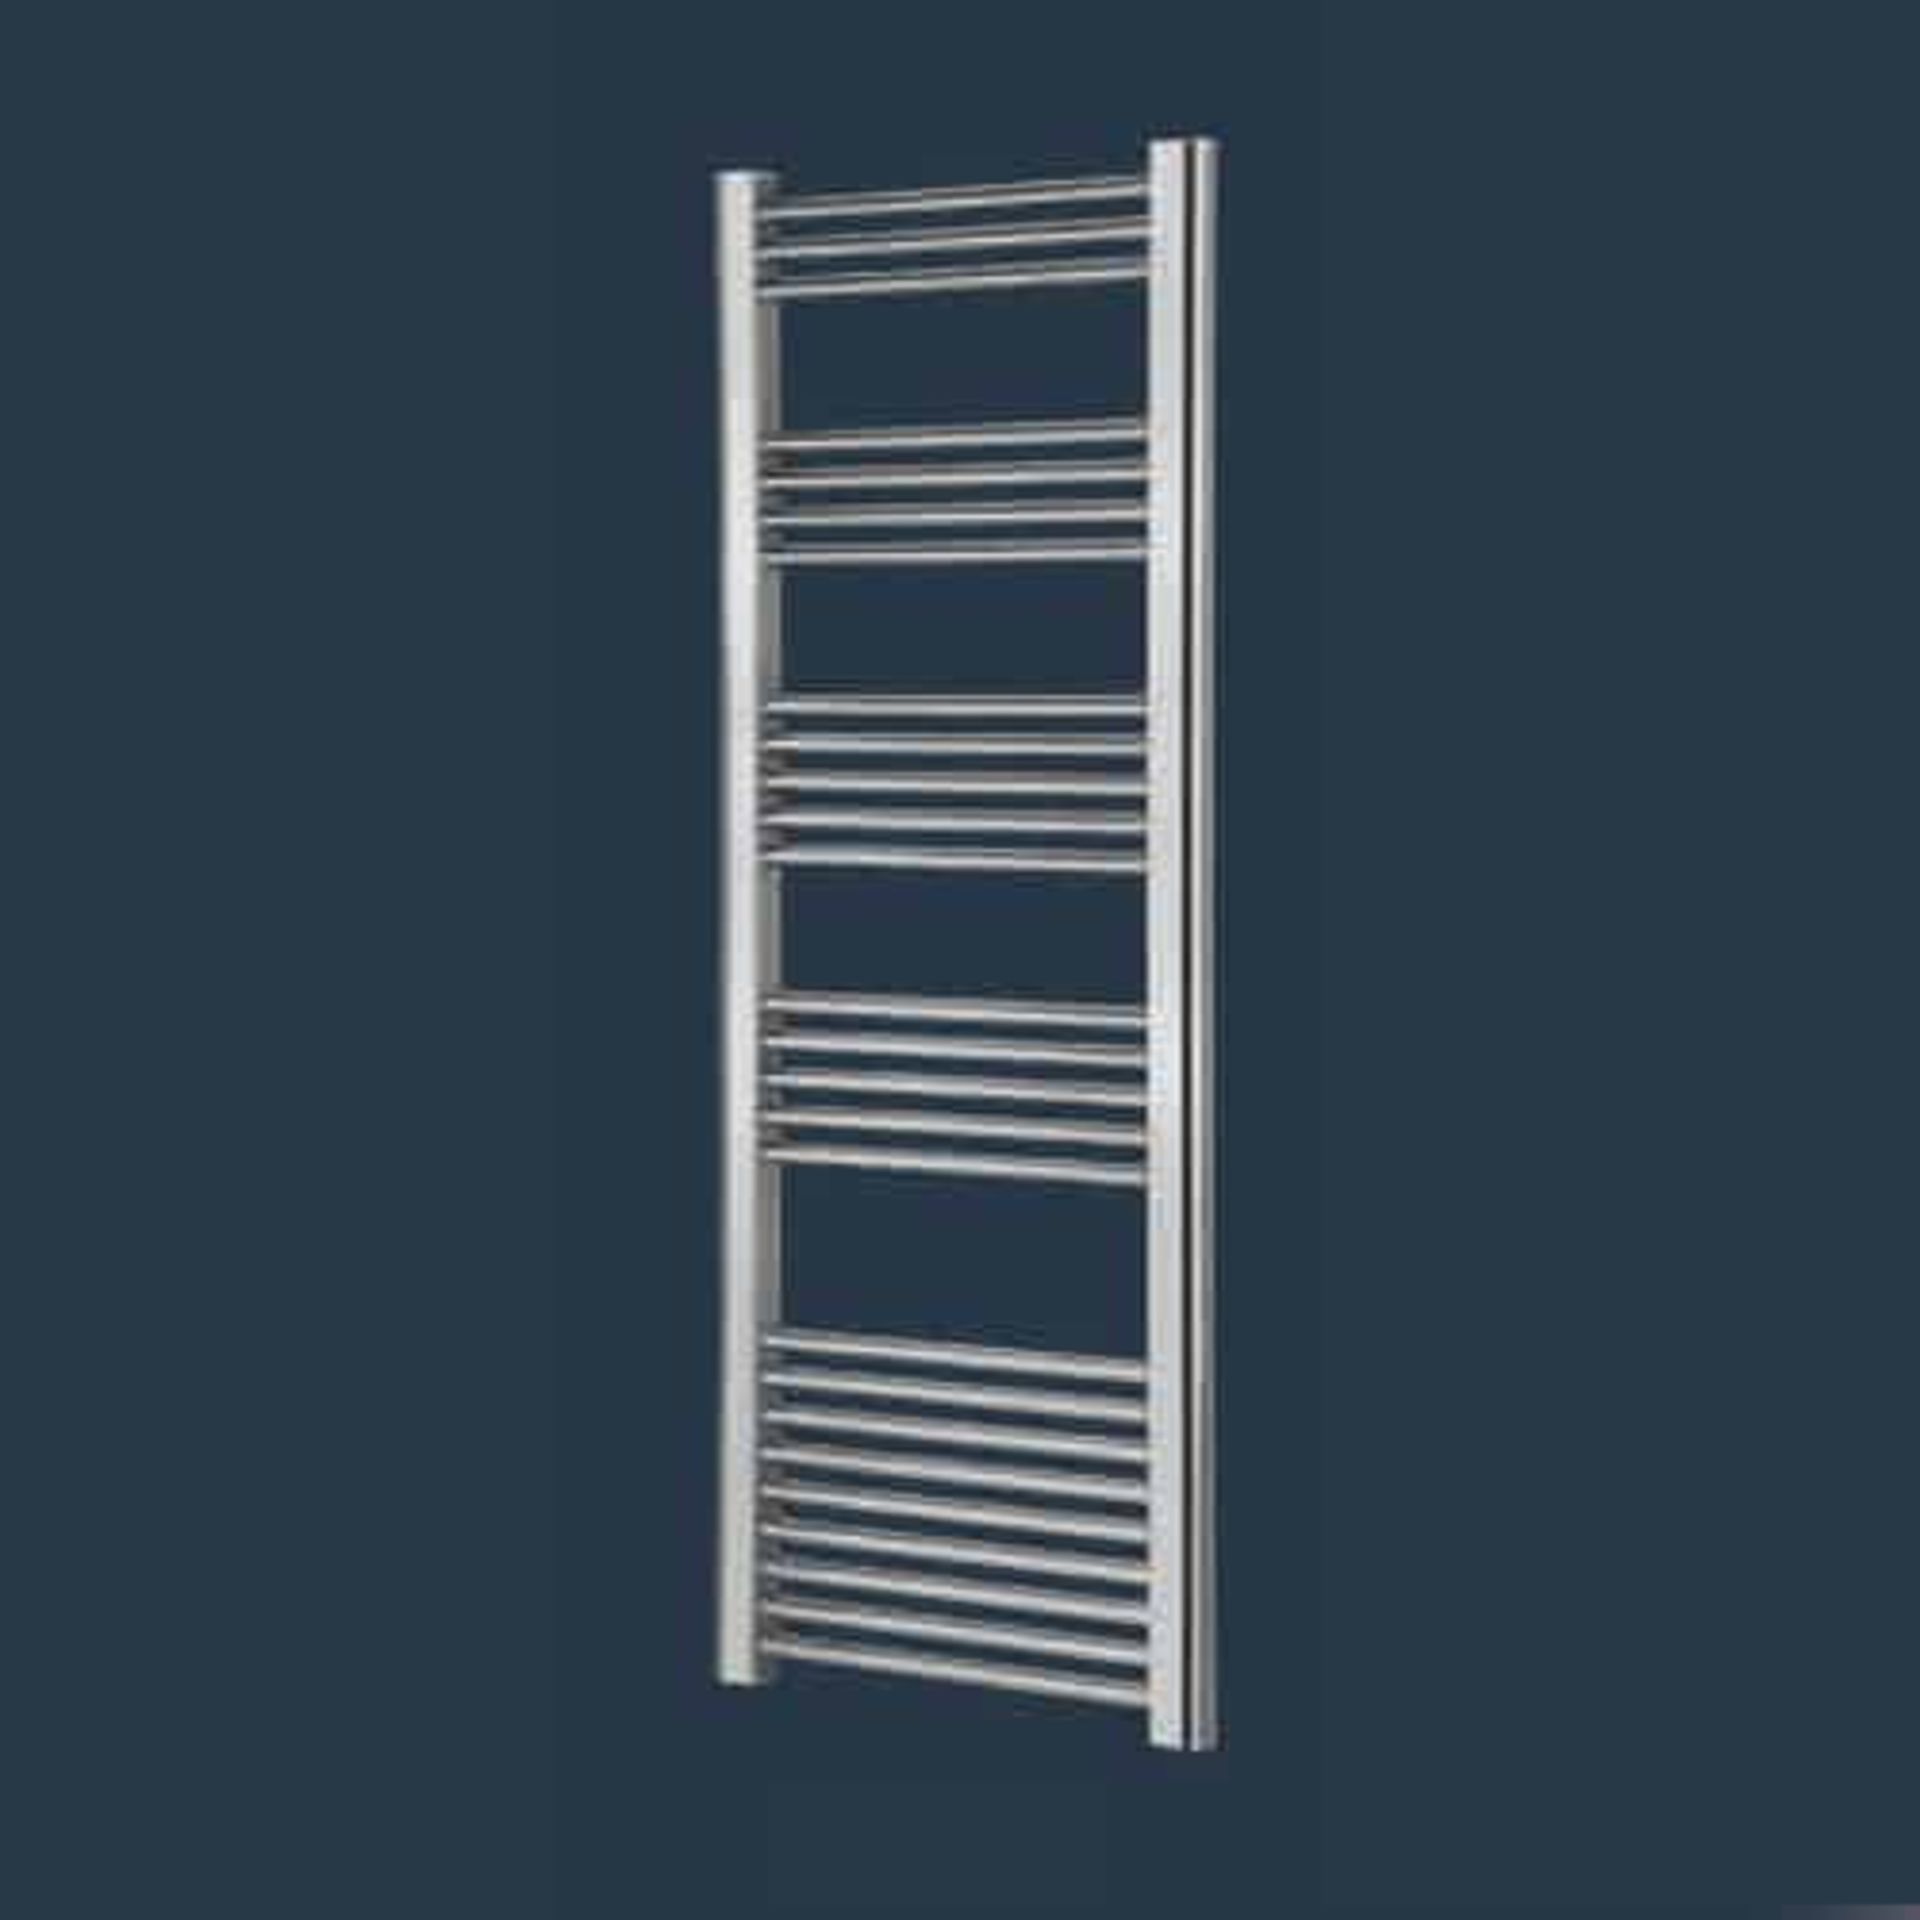 New (E68) Chrome Straight Ladder Heated Towel Rail 1600x600mm. Finished In Chrome, This 1600mm ...